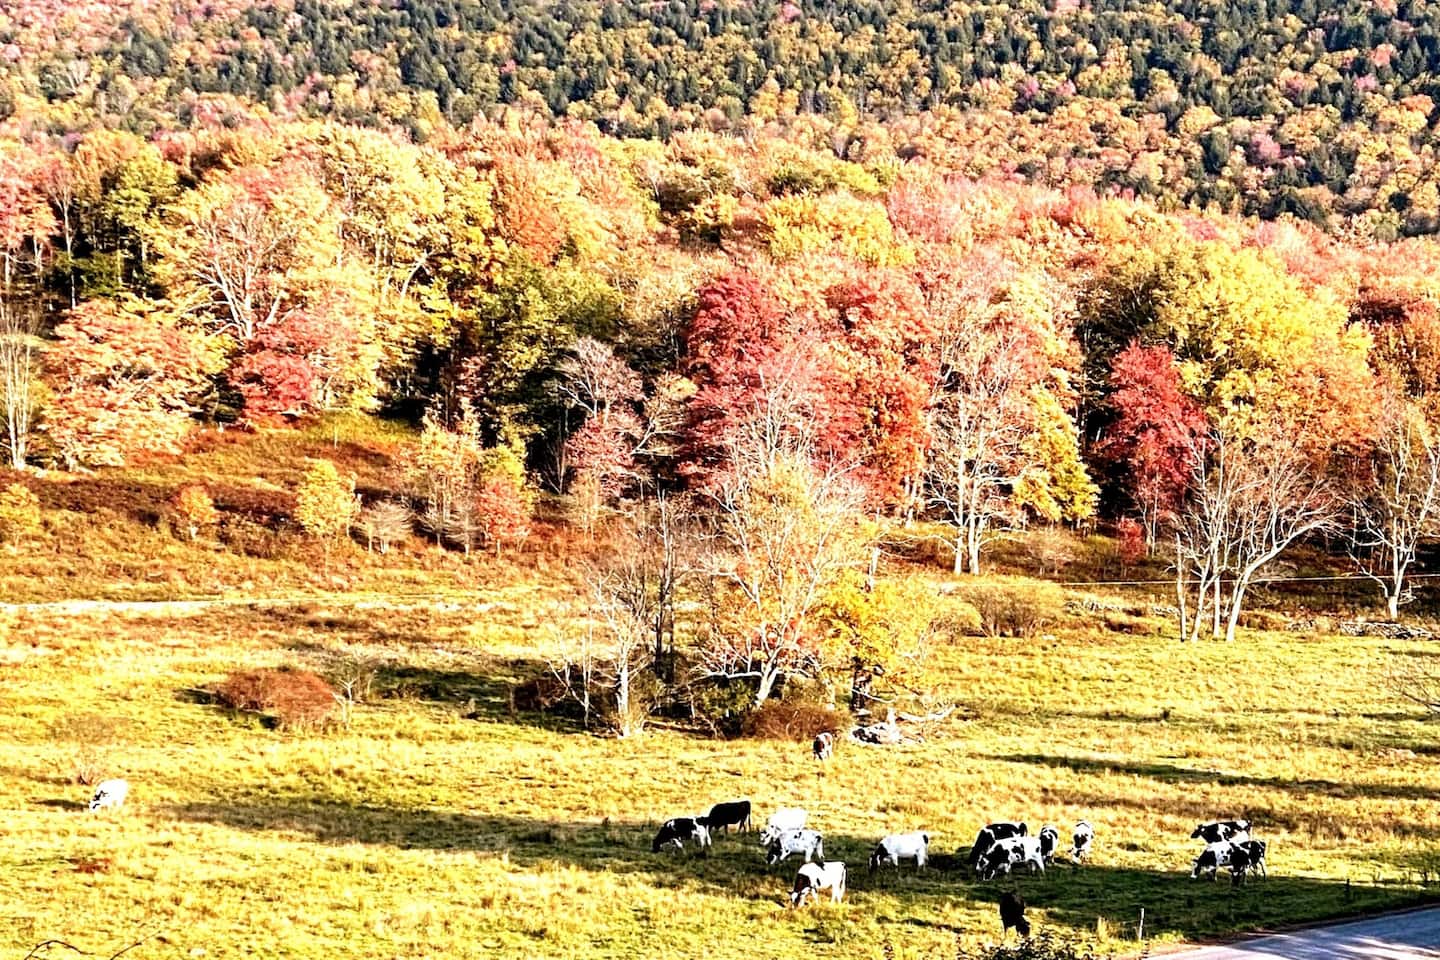 Autumn colors and the cow neighbors across the road.